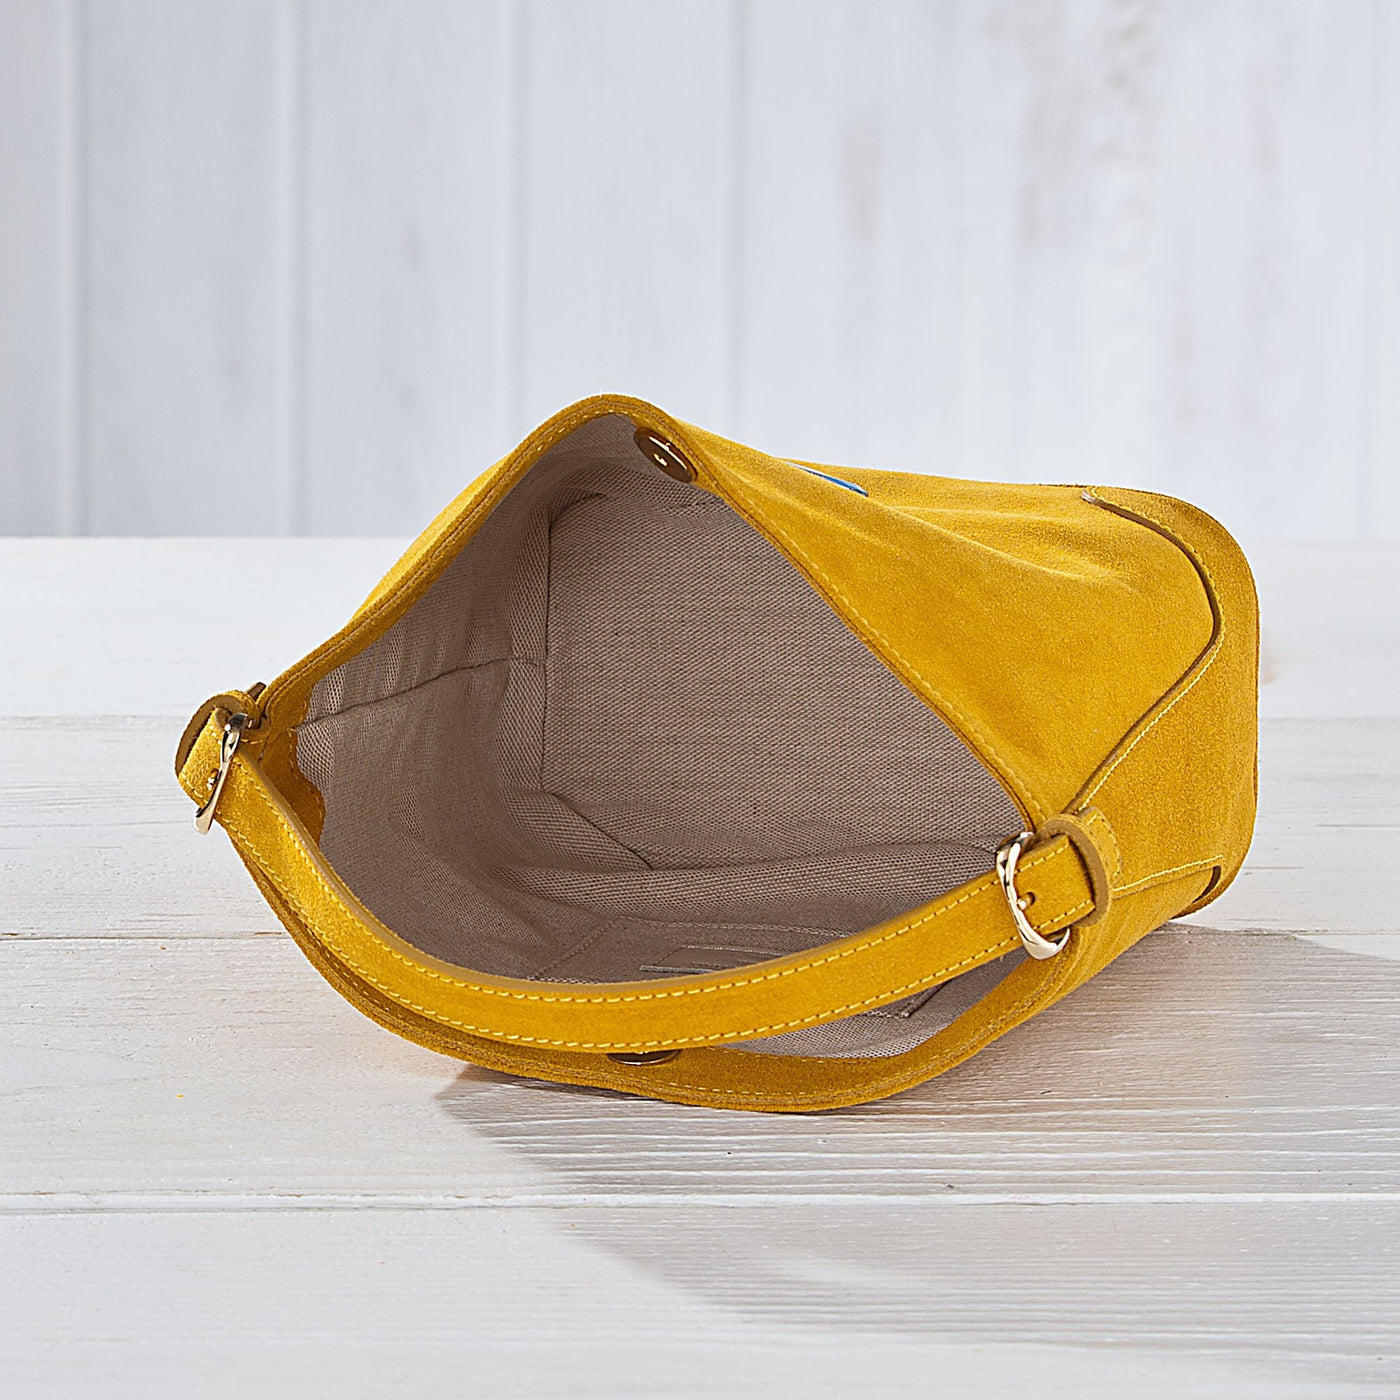 Florentine Suede Mustard Tote With Marbled Blue Agate